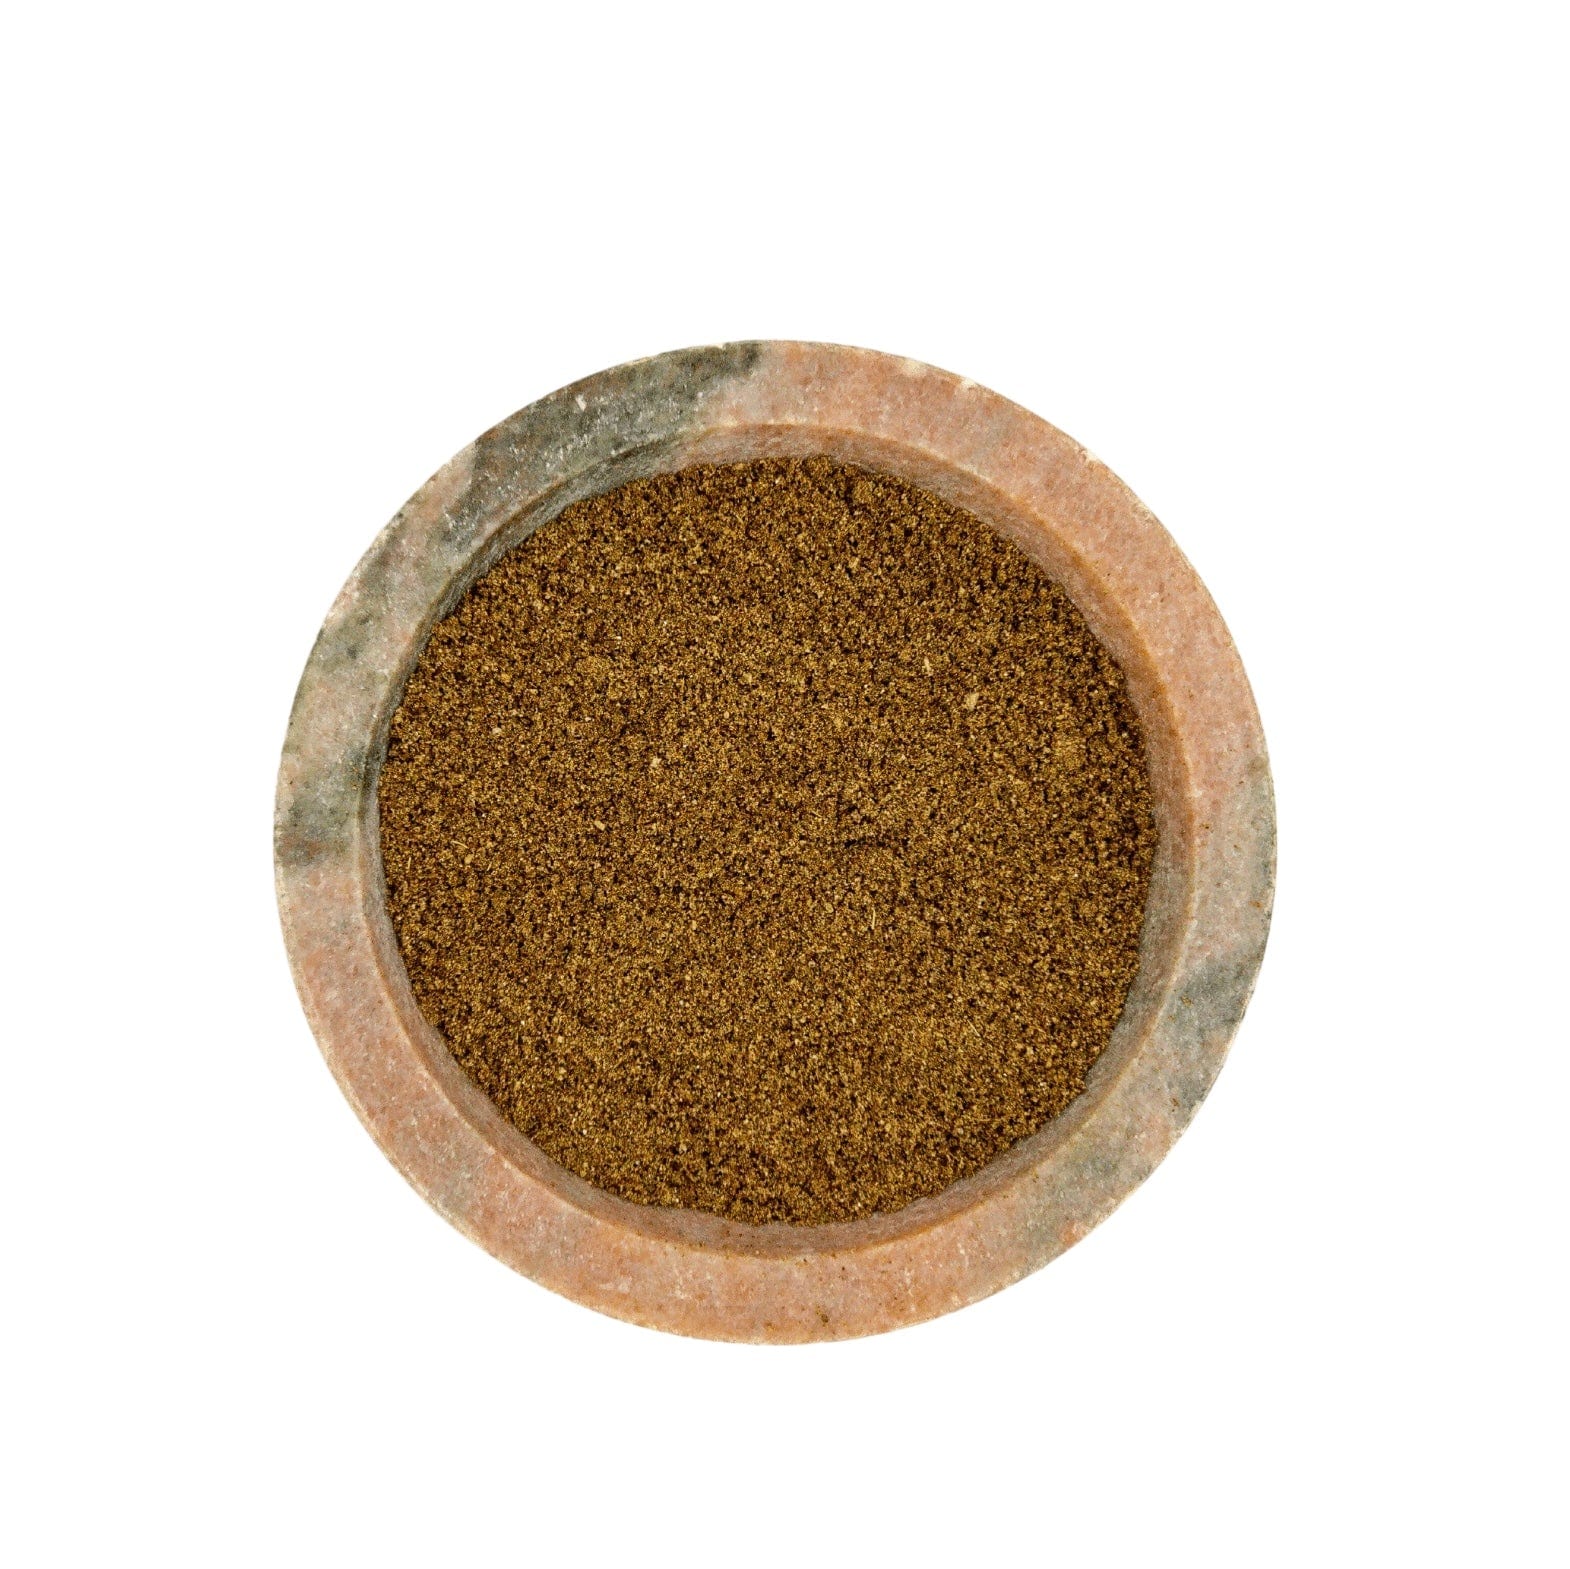 Chai Latte Powder in Boutique Cylinder by The Tea Collective